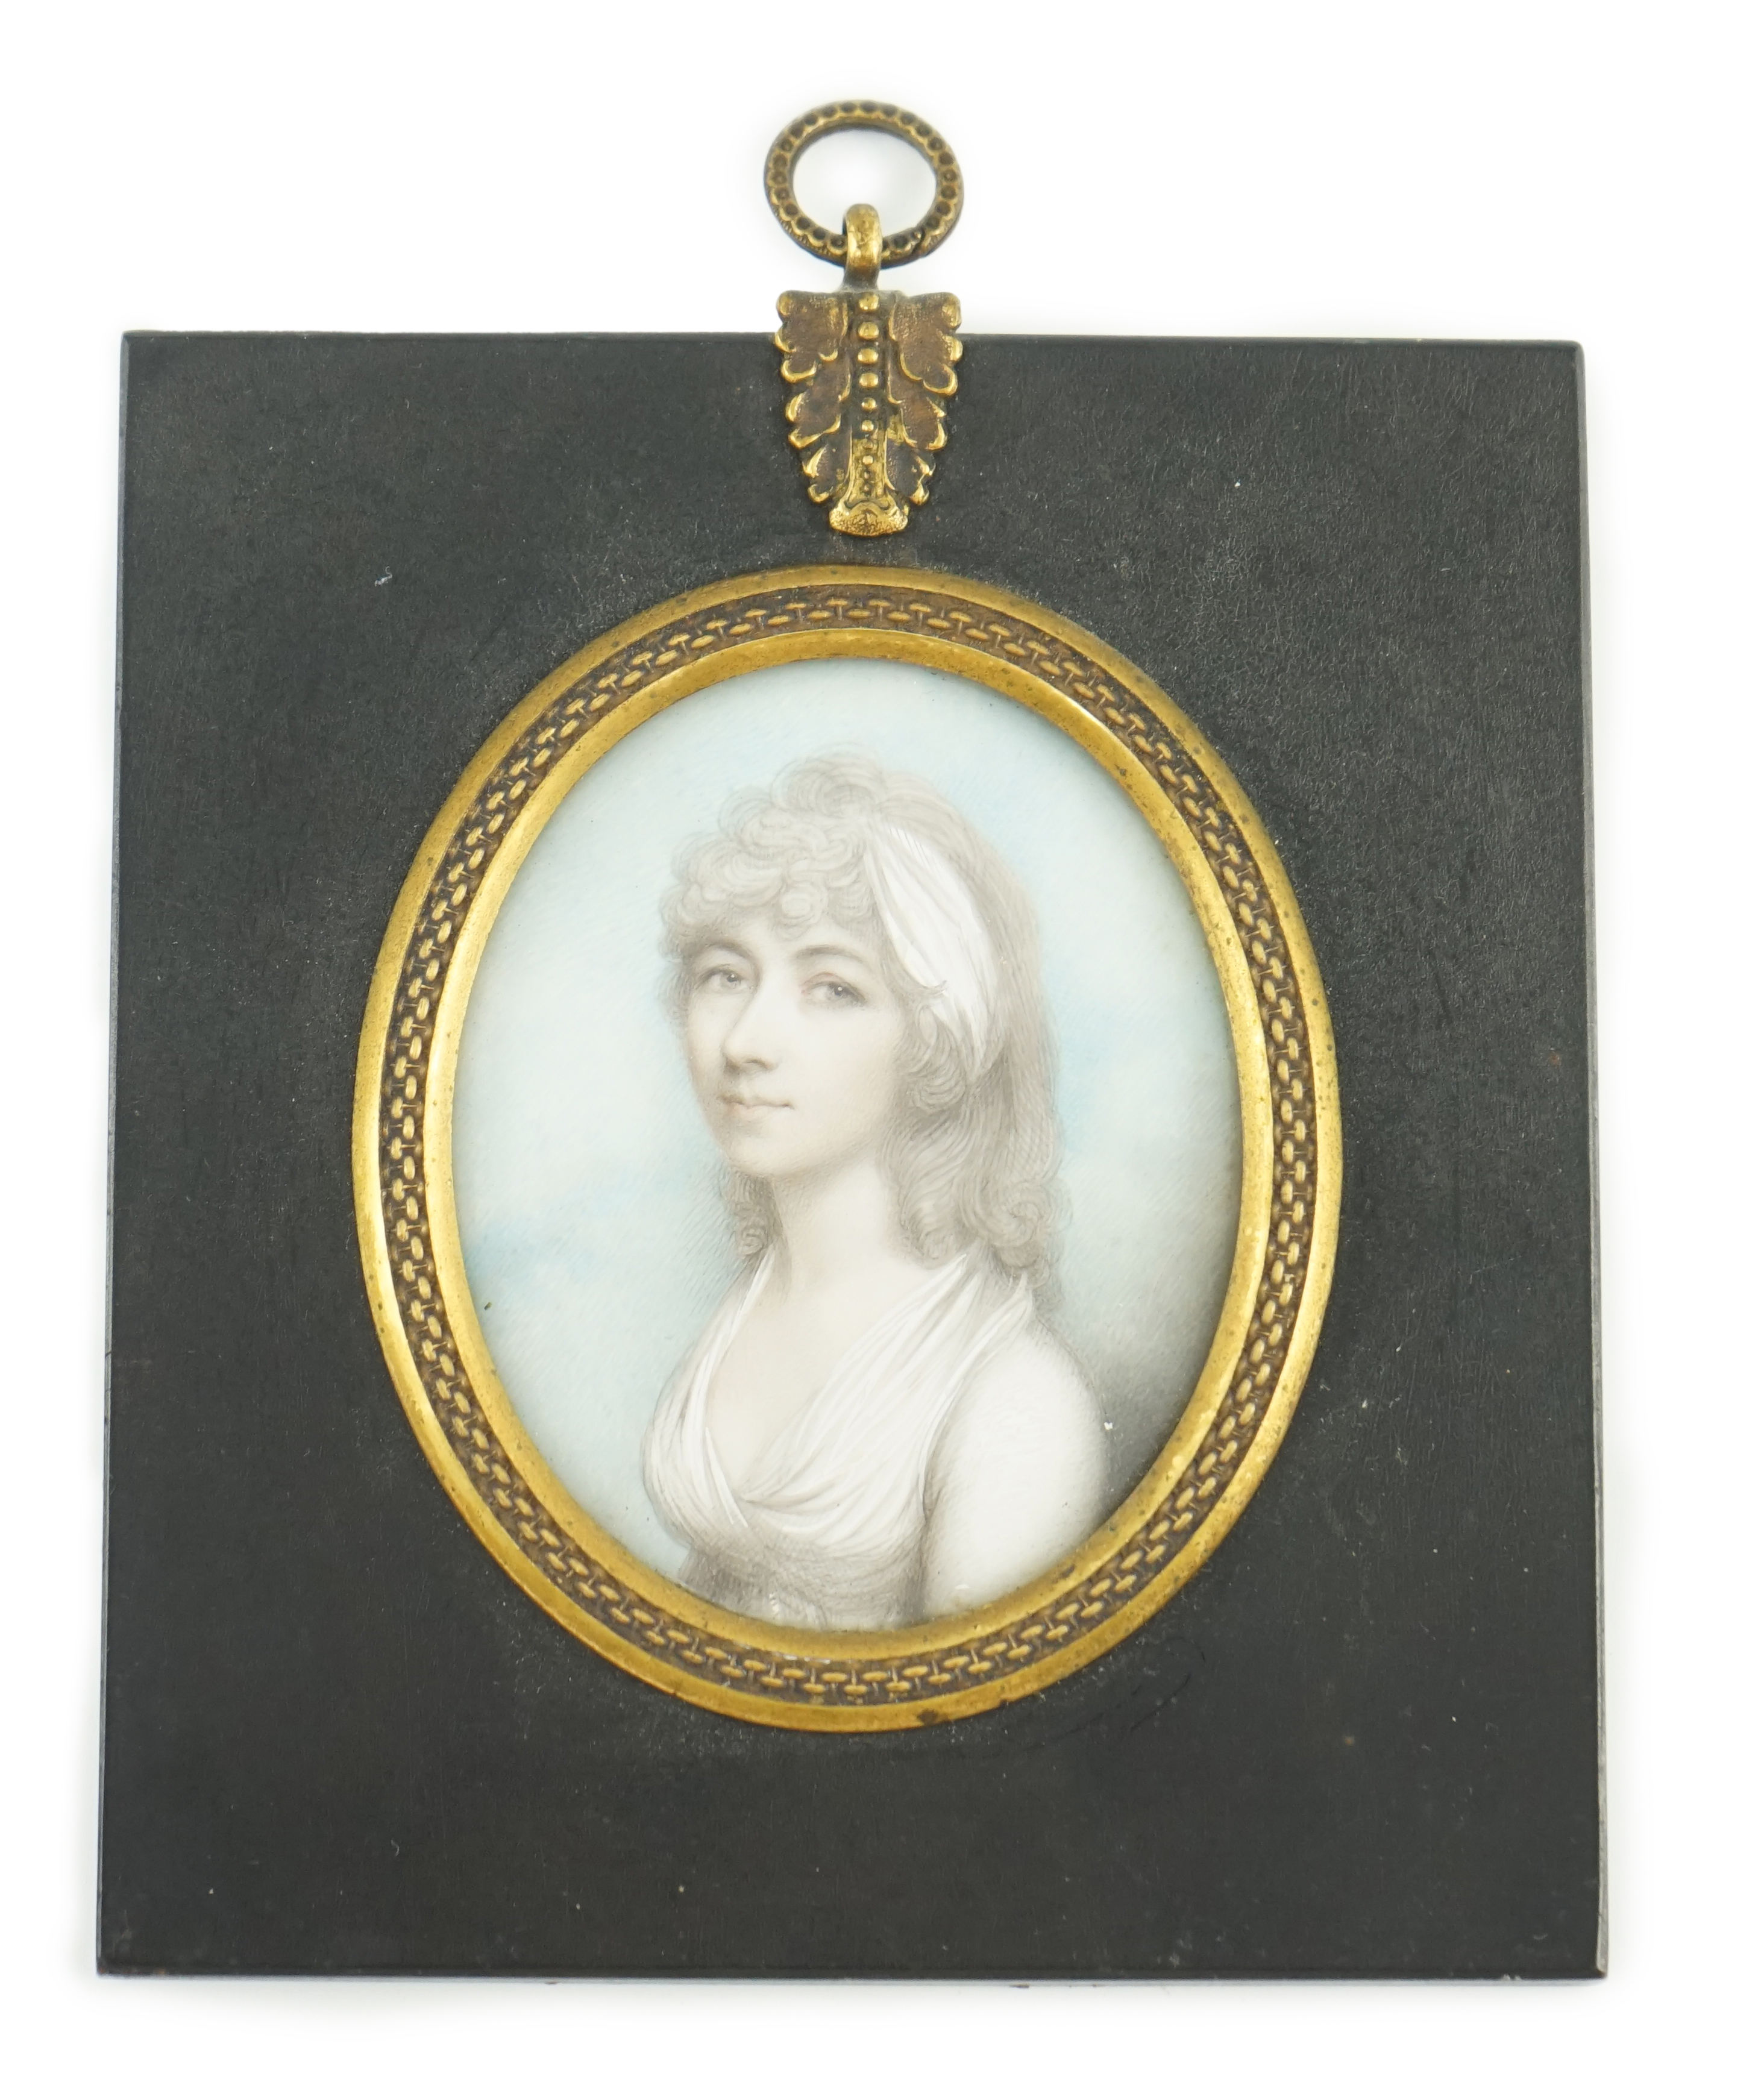 Andrew Plimer (1763-1837), Portrait miniature of Lady Harriet Silvester, watercolour on ivory, 7.3 x 6cm. CITES Submission reference YATL7XKD